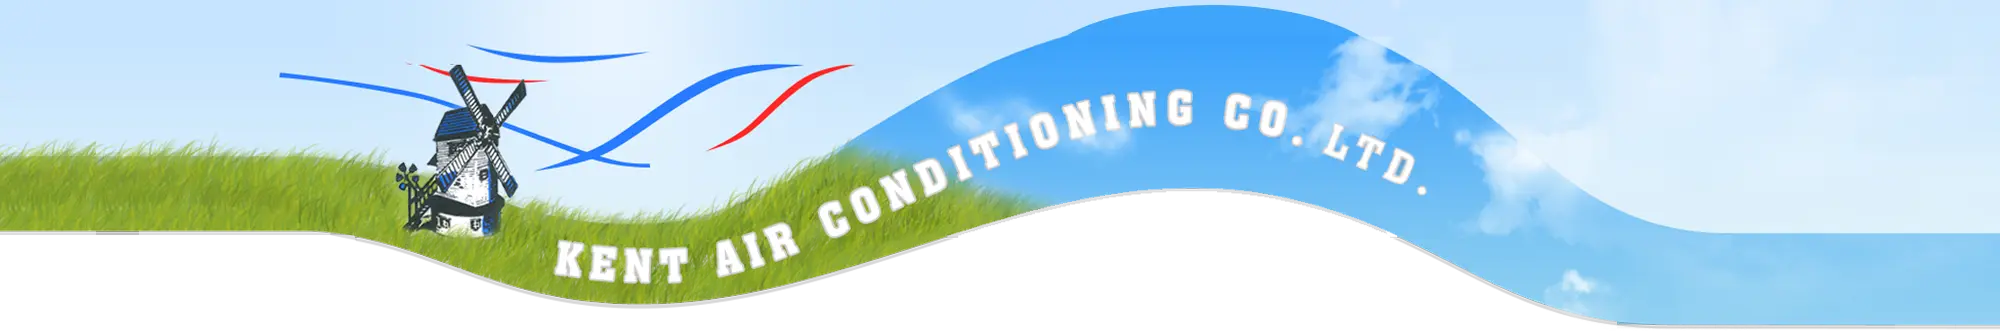 Kent Air Conditioning Co